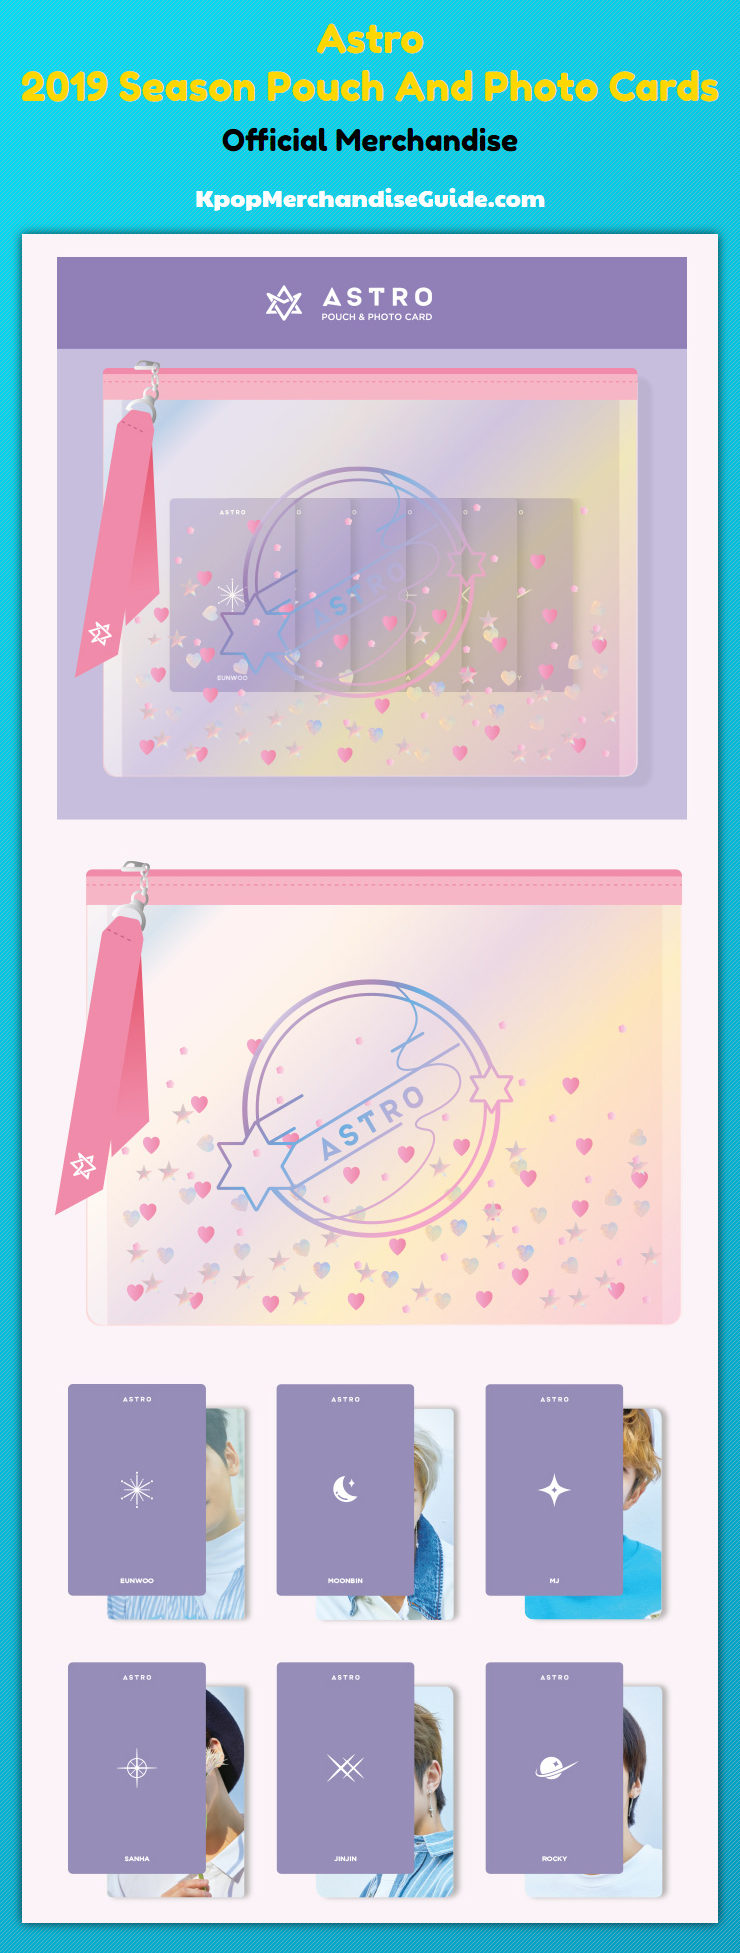 Astro 2019 Season Pouch And Photocards